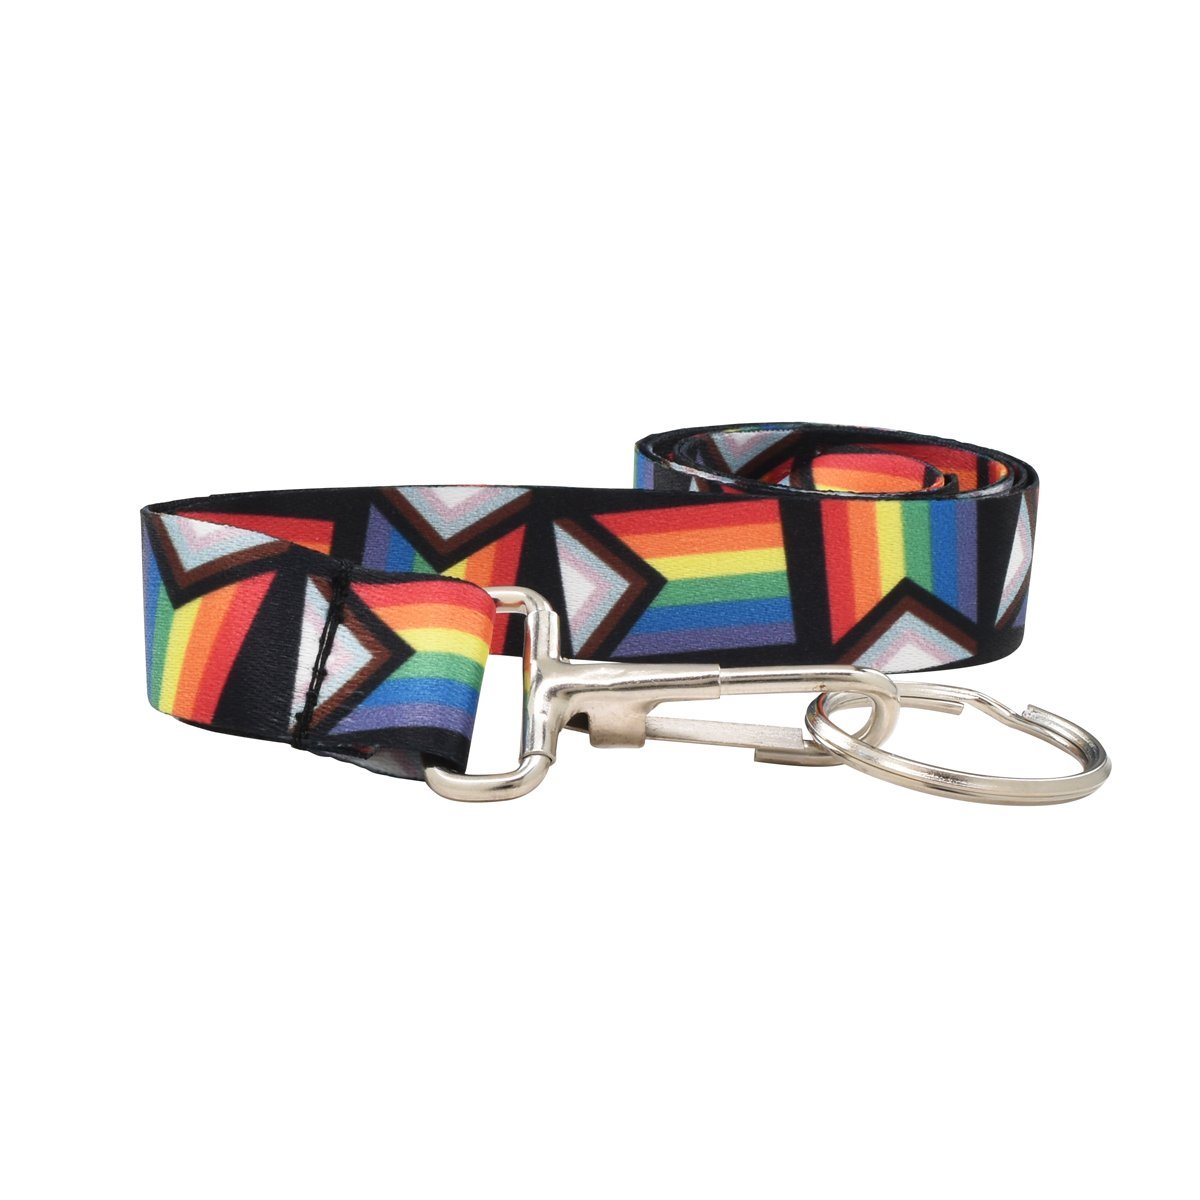 Daniel Quasar's "Progress Pride" Stripe Lanyards by Fundraising For A Cause